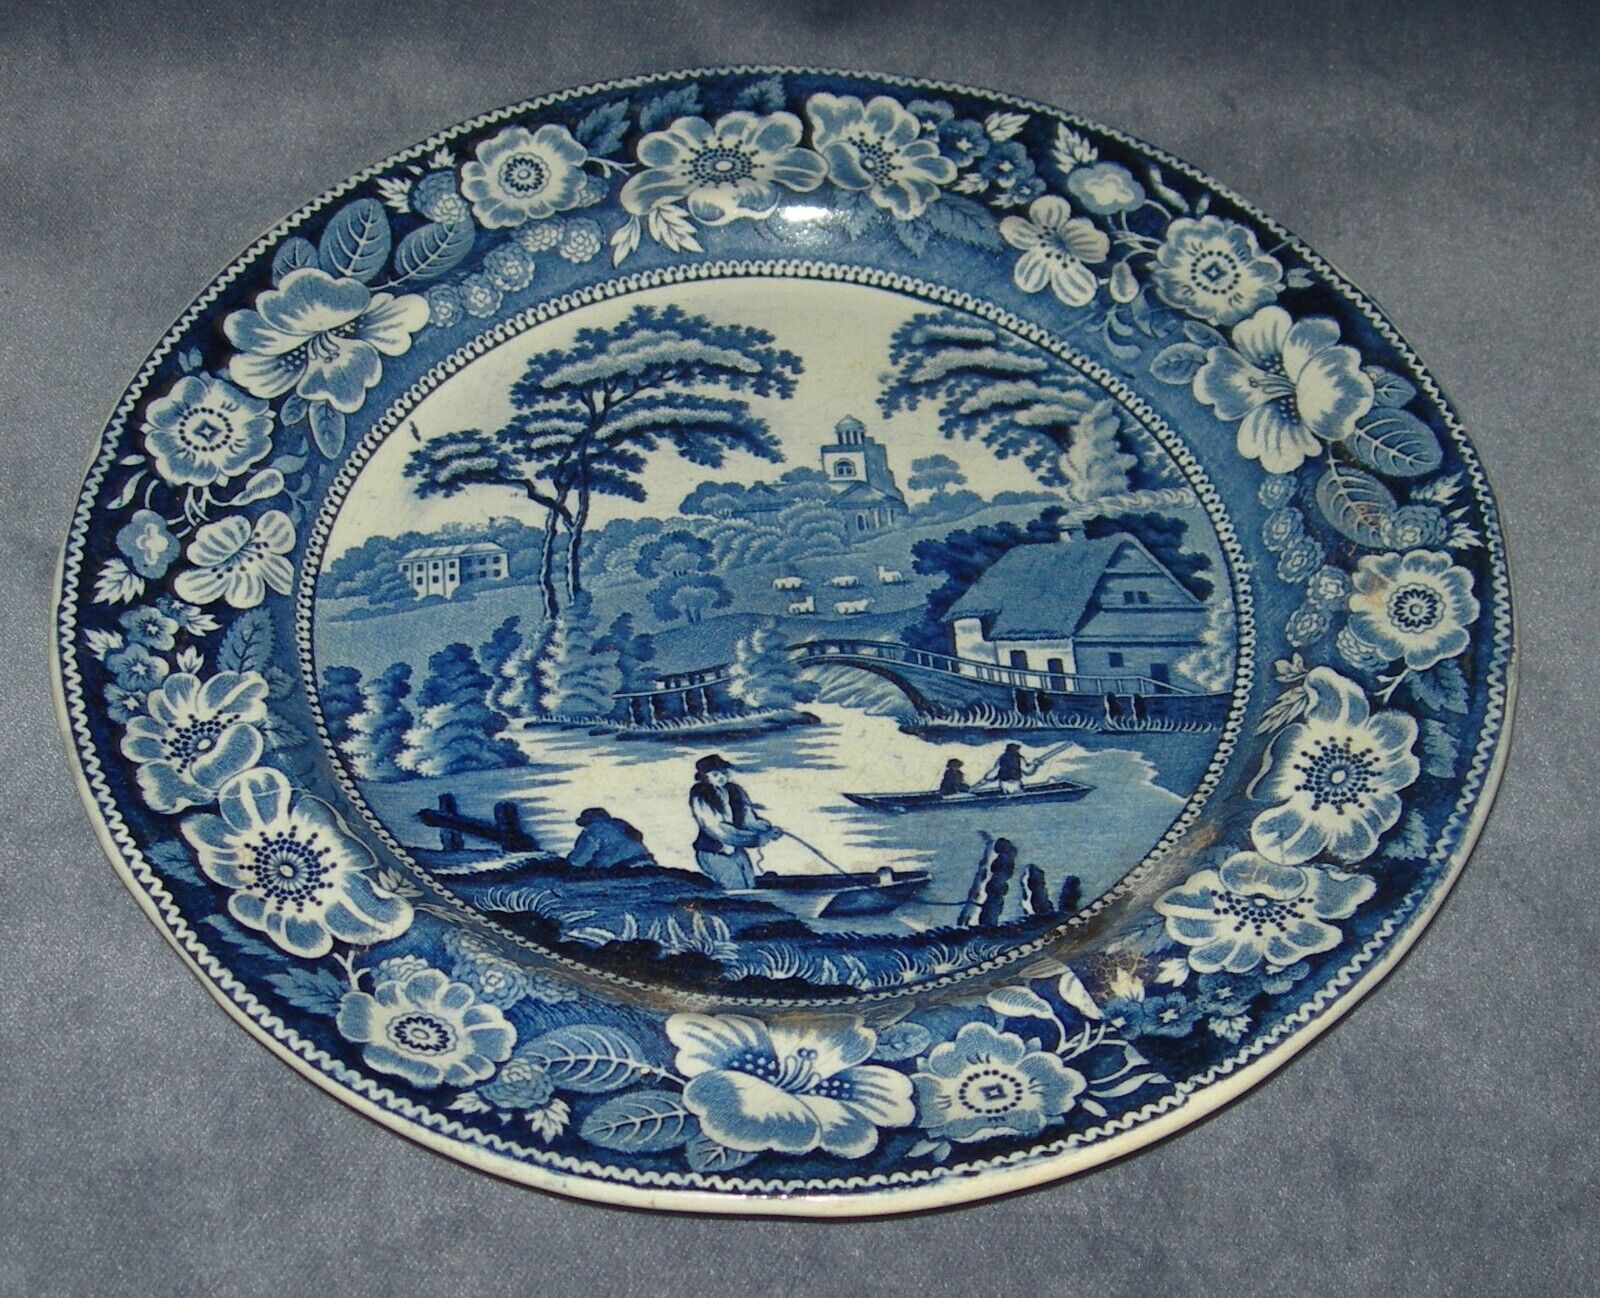 Plate Blue and White Transfer-Ware George Jones “Wild Rose” 1860- 1891 Flow blue